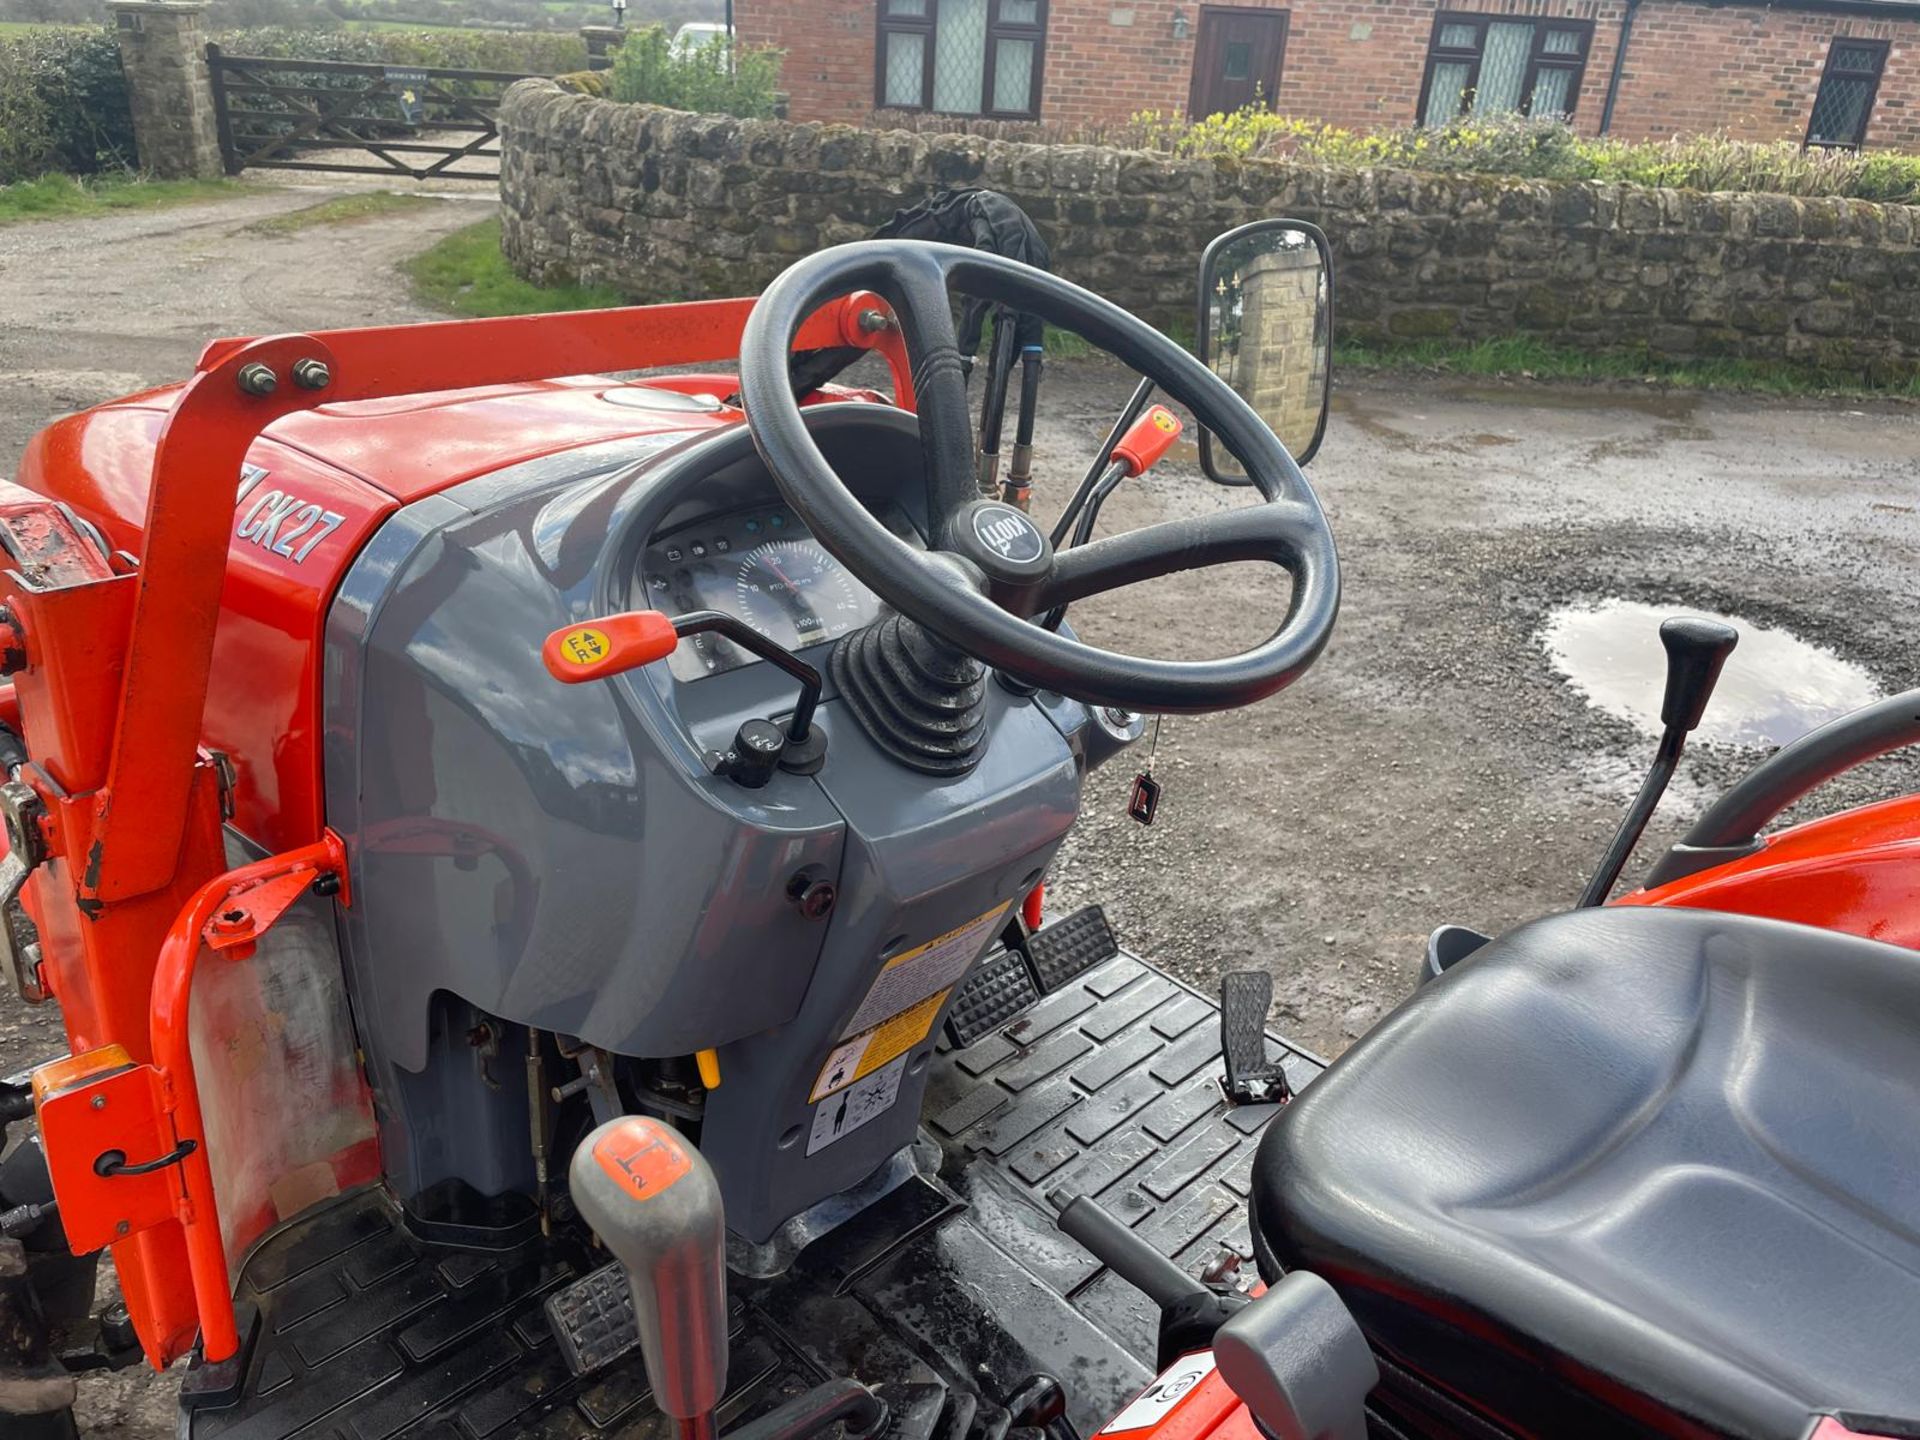 60 REG KIOTI CX27 27HP 4WD COMPACT TRACTOR WITH KIOTI KL130 FRONT LOADER AND PALLET FORKS *PLUS VAT* - Image 17 of 19